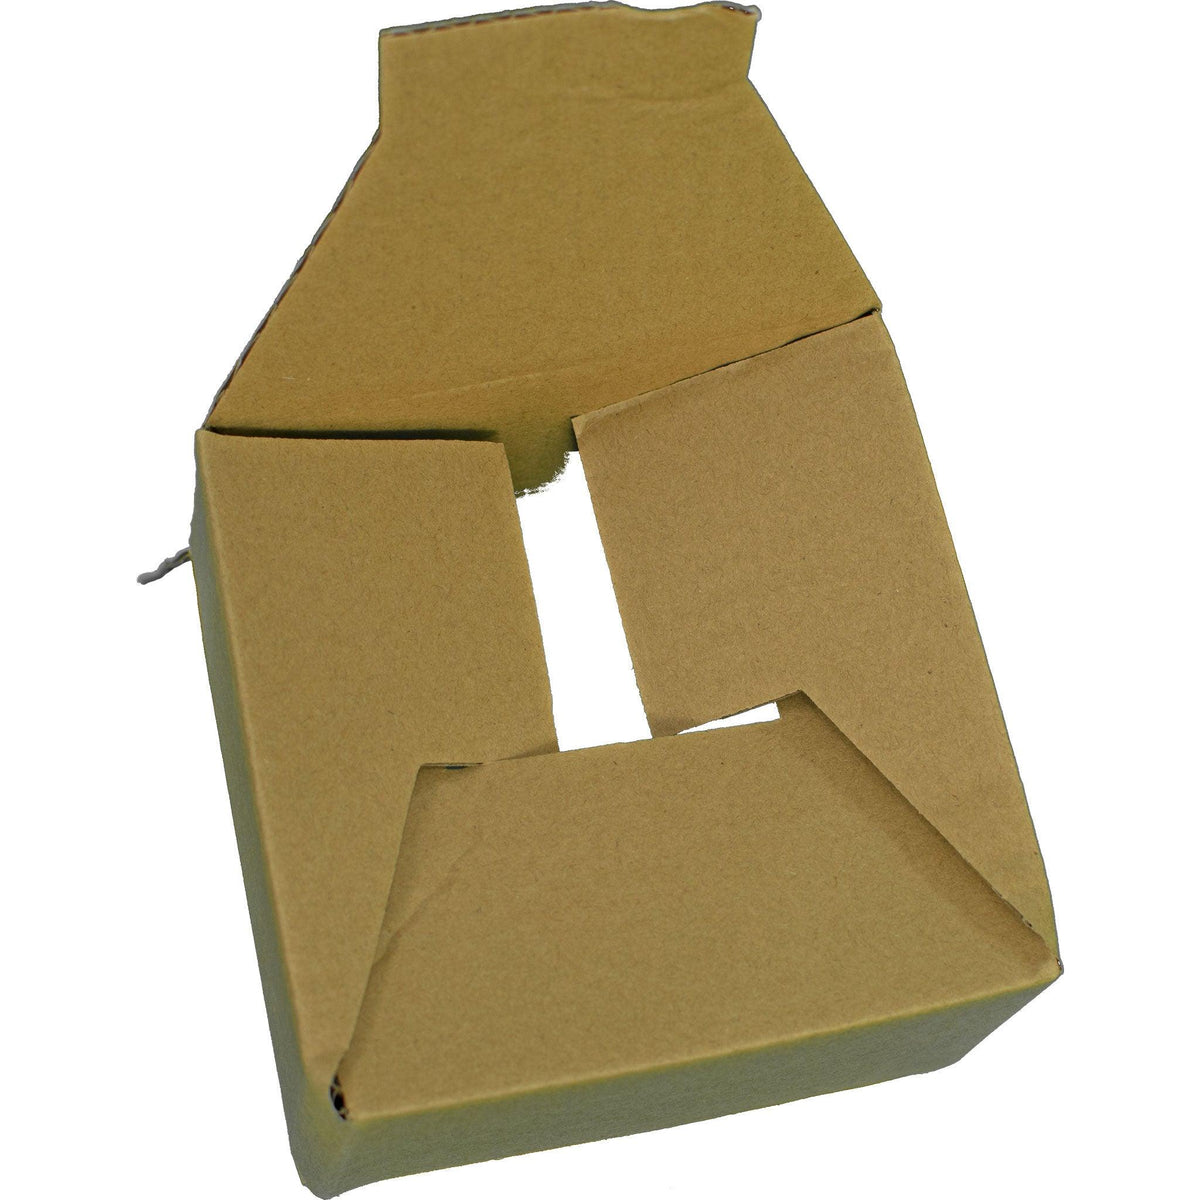 Purchase brand new empty Cardboard Boxes for your C-7 Light Bulbs from Lee Display. Organize your holiday lights, store your bulbs safely, and keep them safe from water damage. On sale now at leedisplay.com